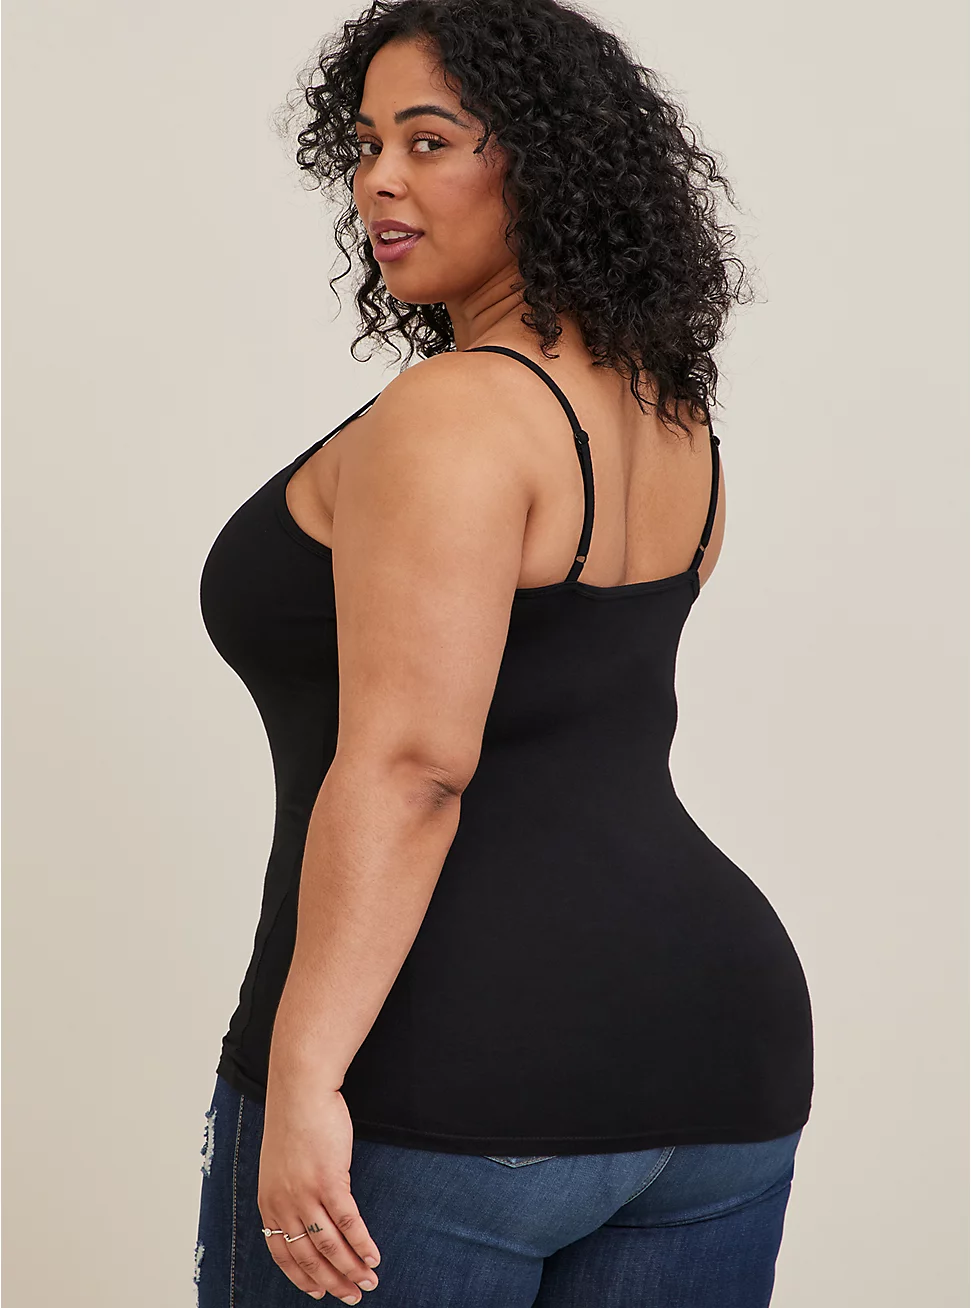 plus size modeling outfits 